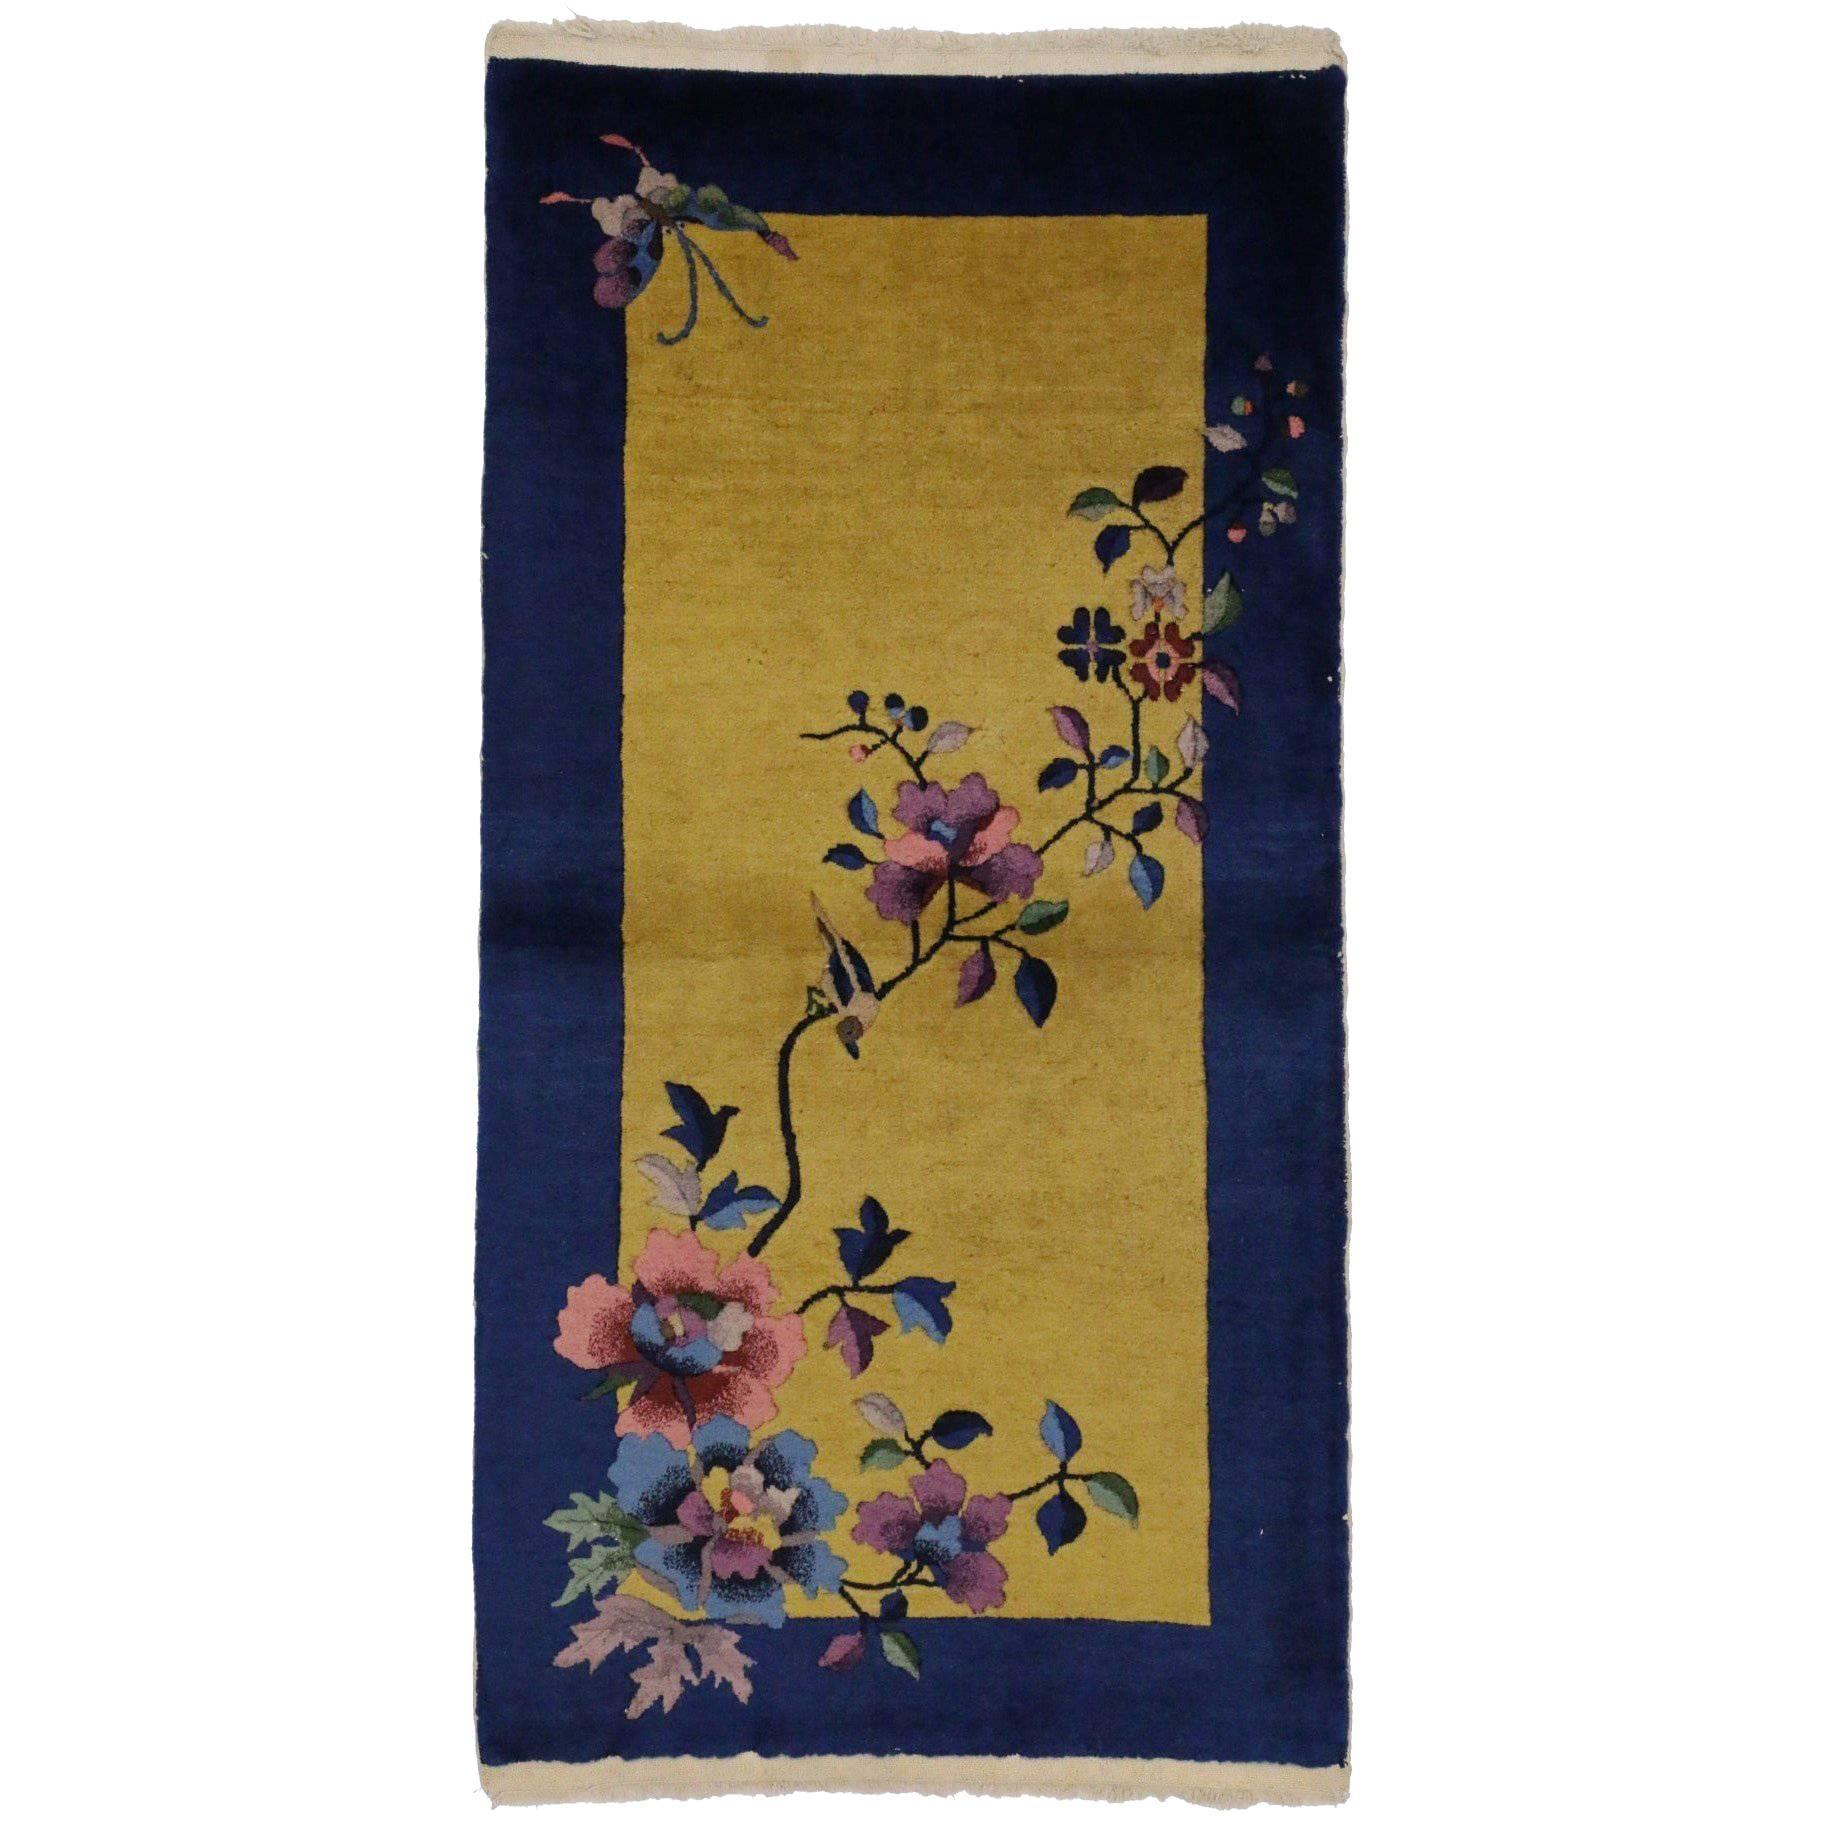 Antique Chinese Art Deco Style Rug Inspired by Walter Nichols